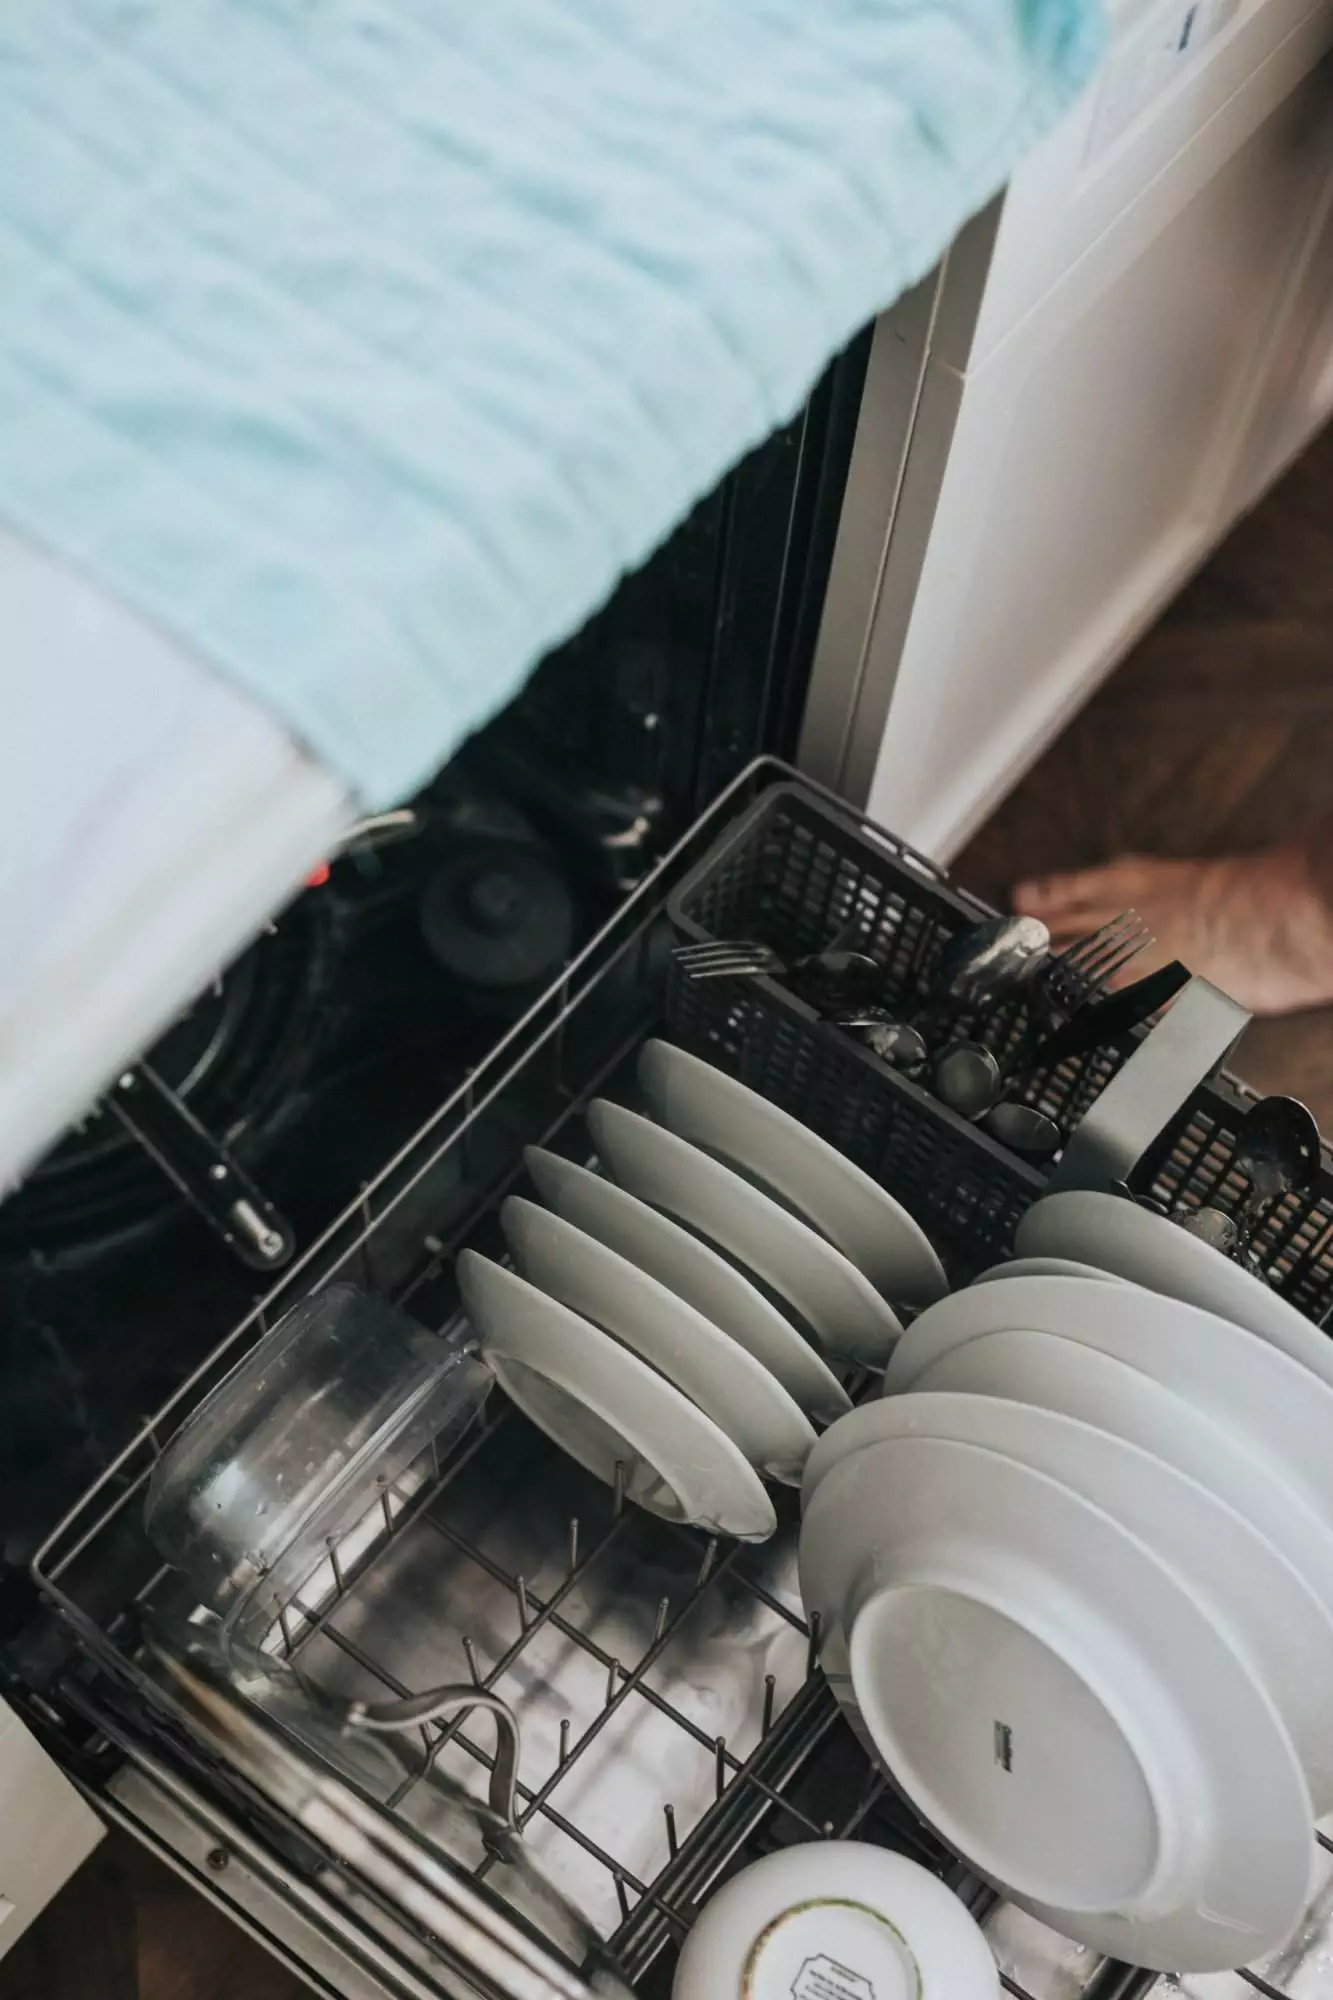 Clean a Smelly Dishwasher